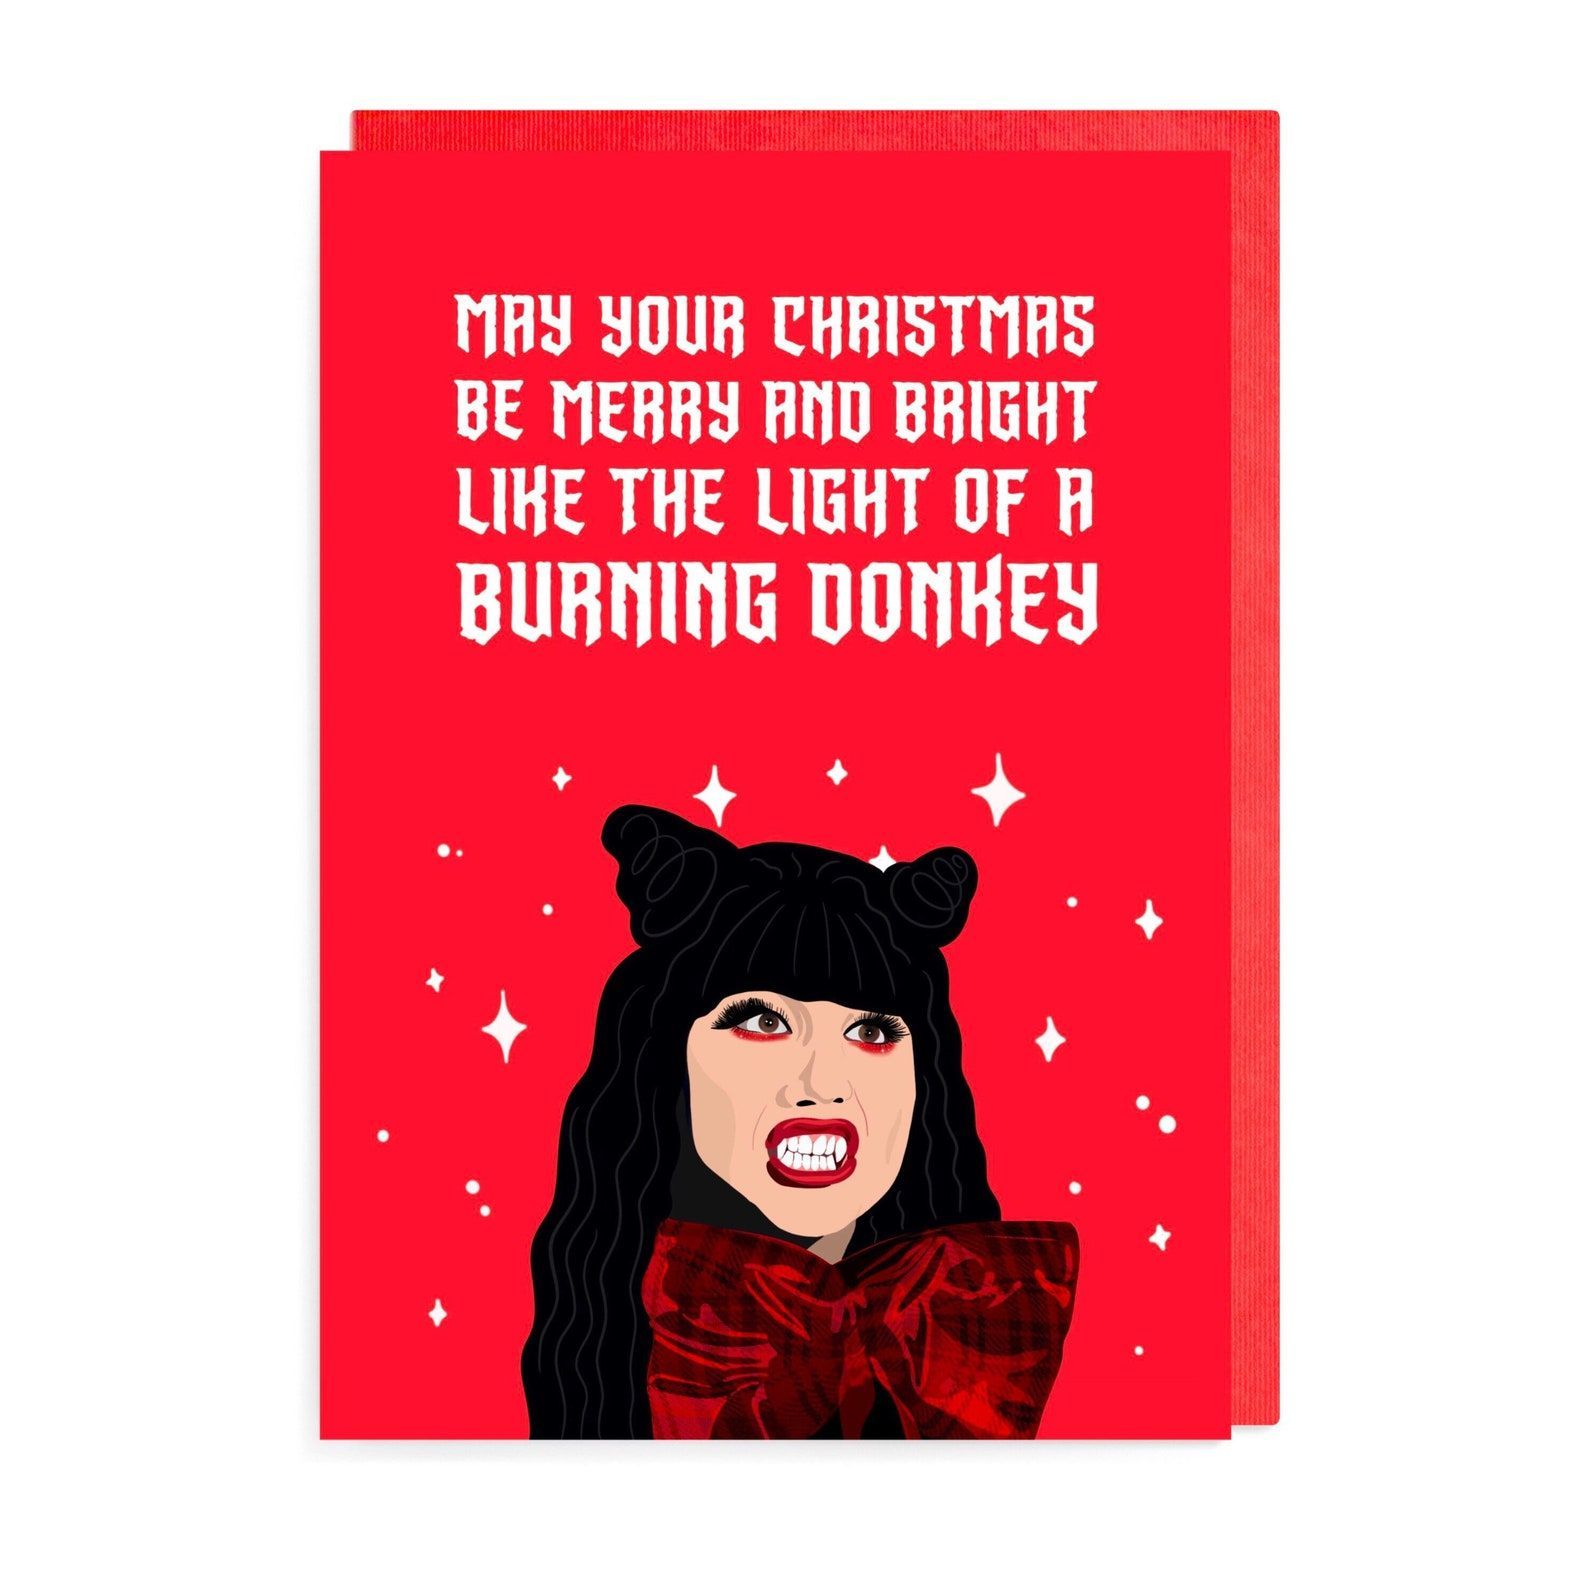 What We Do In the Shadows-inspired Nadja/'Burning Donkey' Christmas card